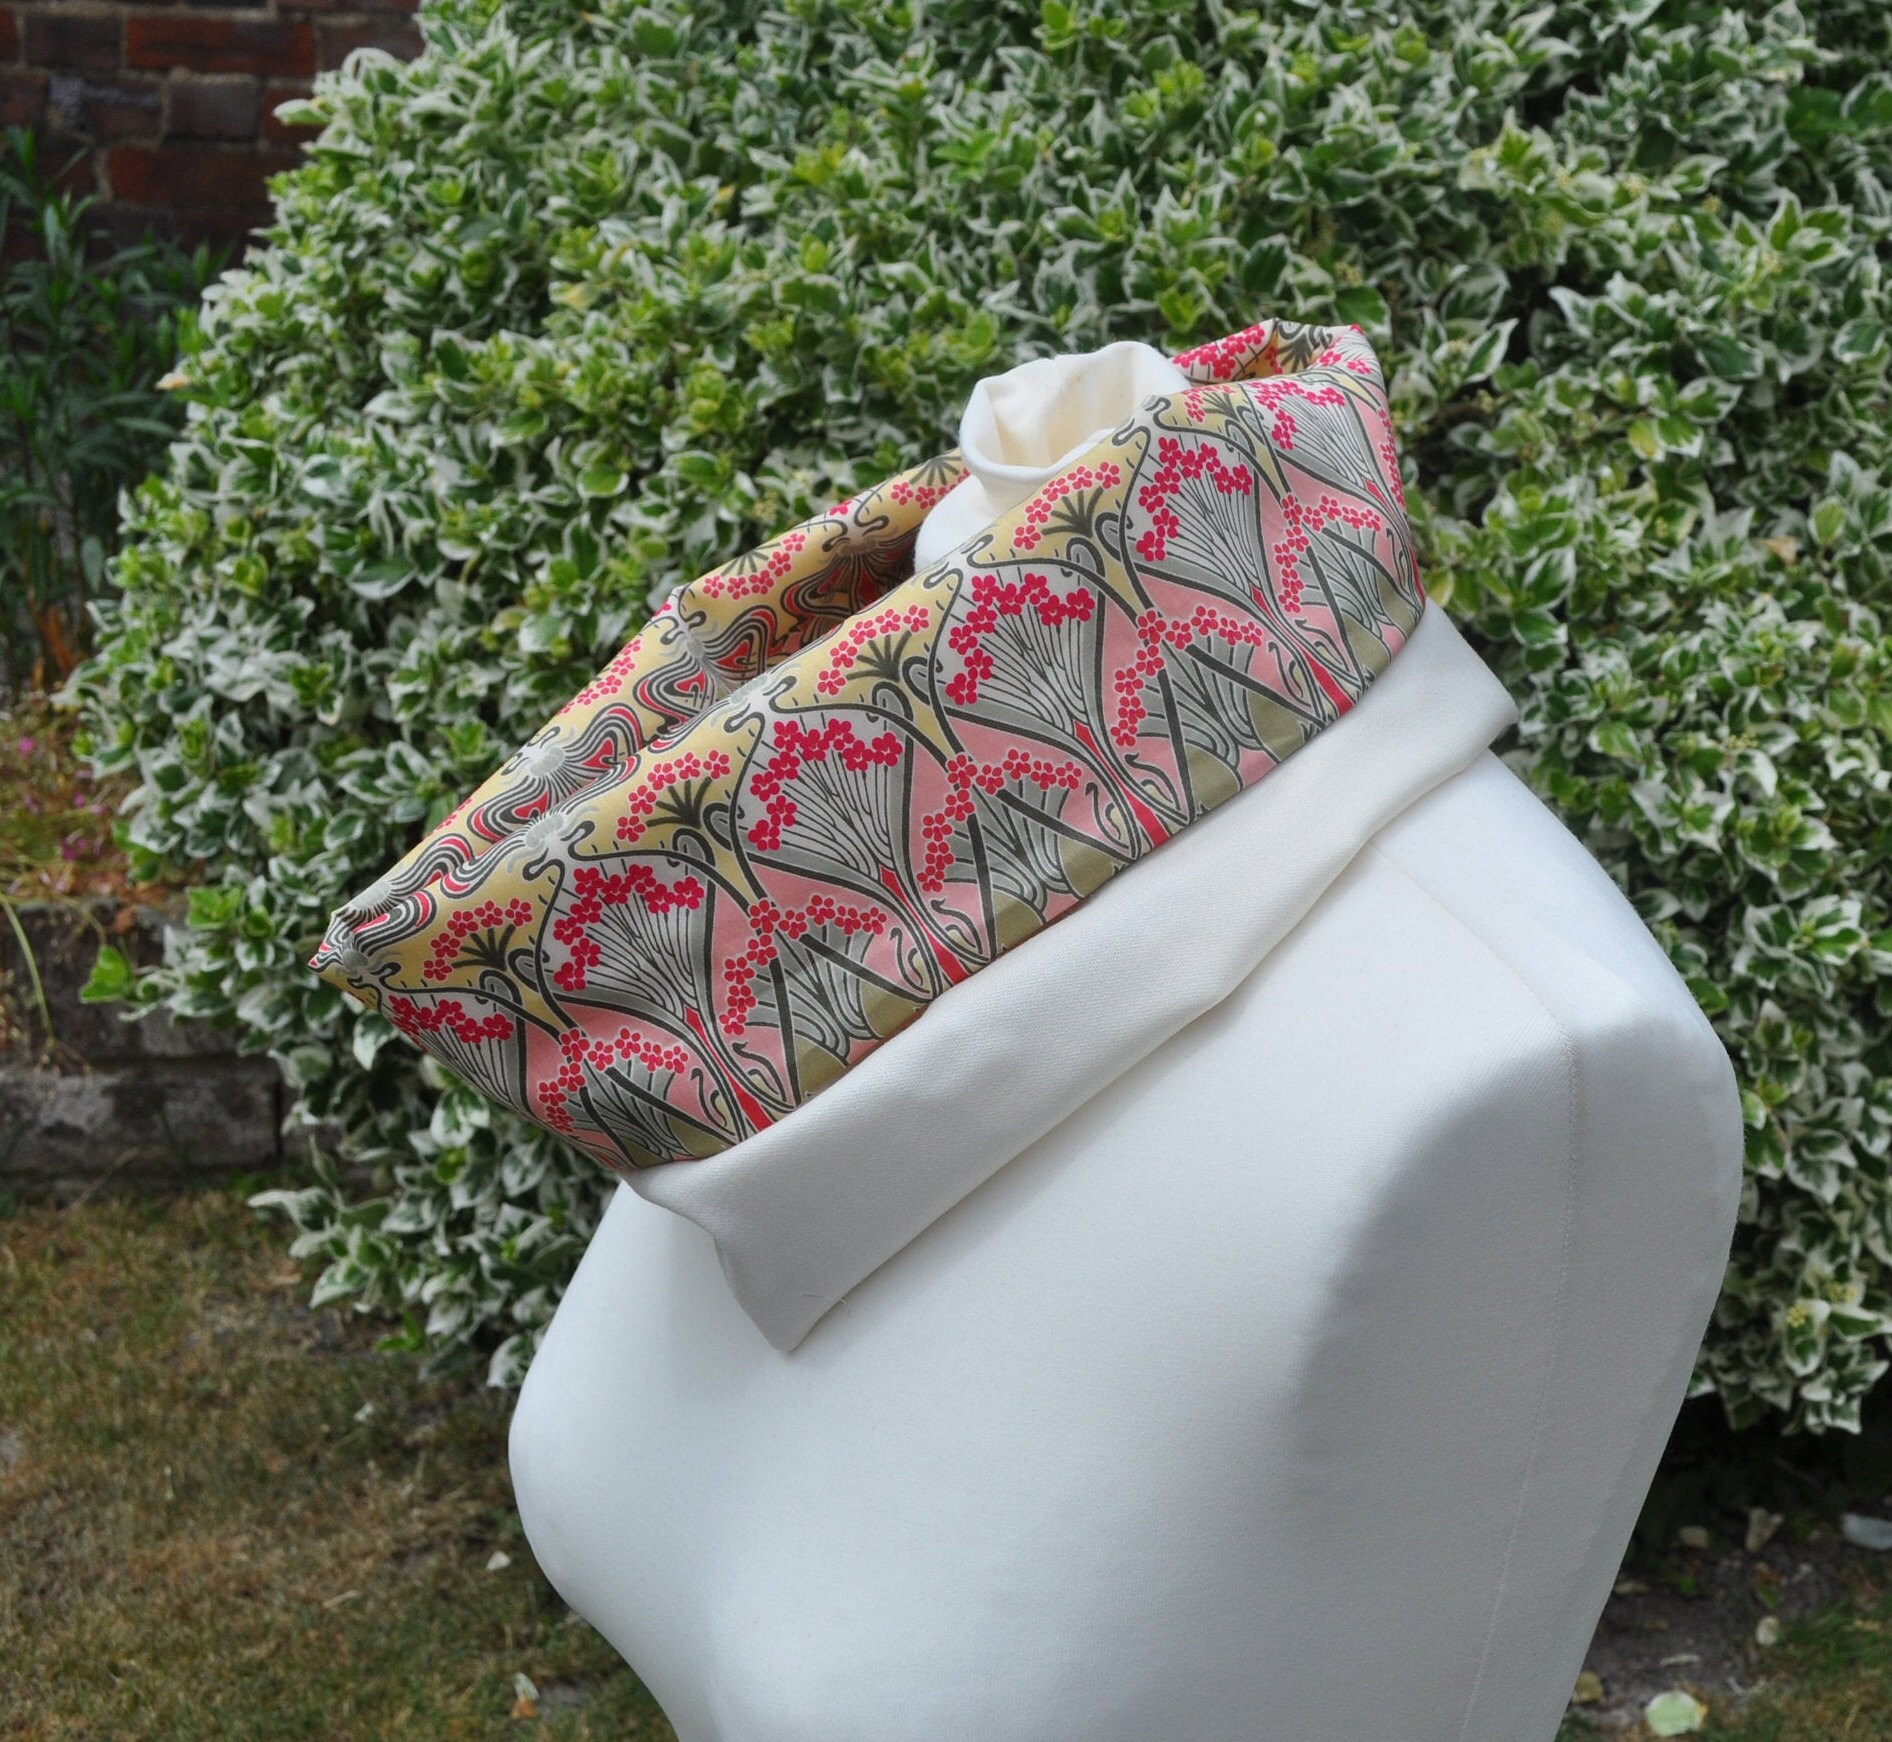 Cowlsnood neck warmer in Mohair green with blue and khaki lined with Liberty tana lawn Eleanora blue green floral